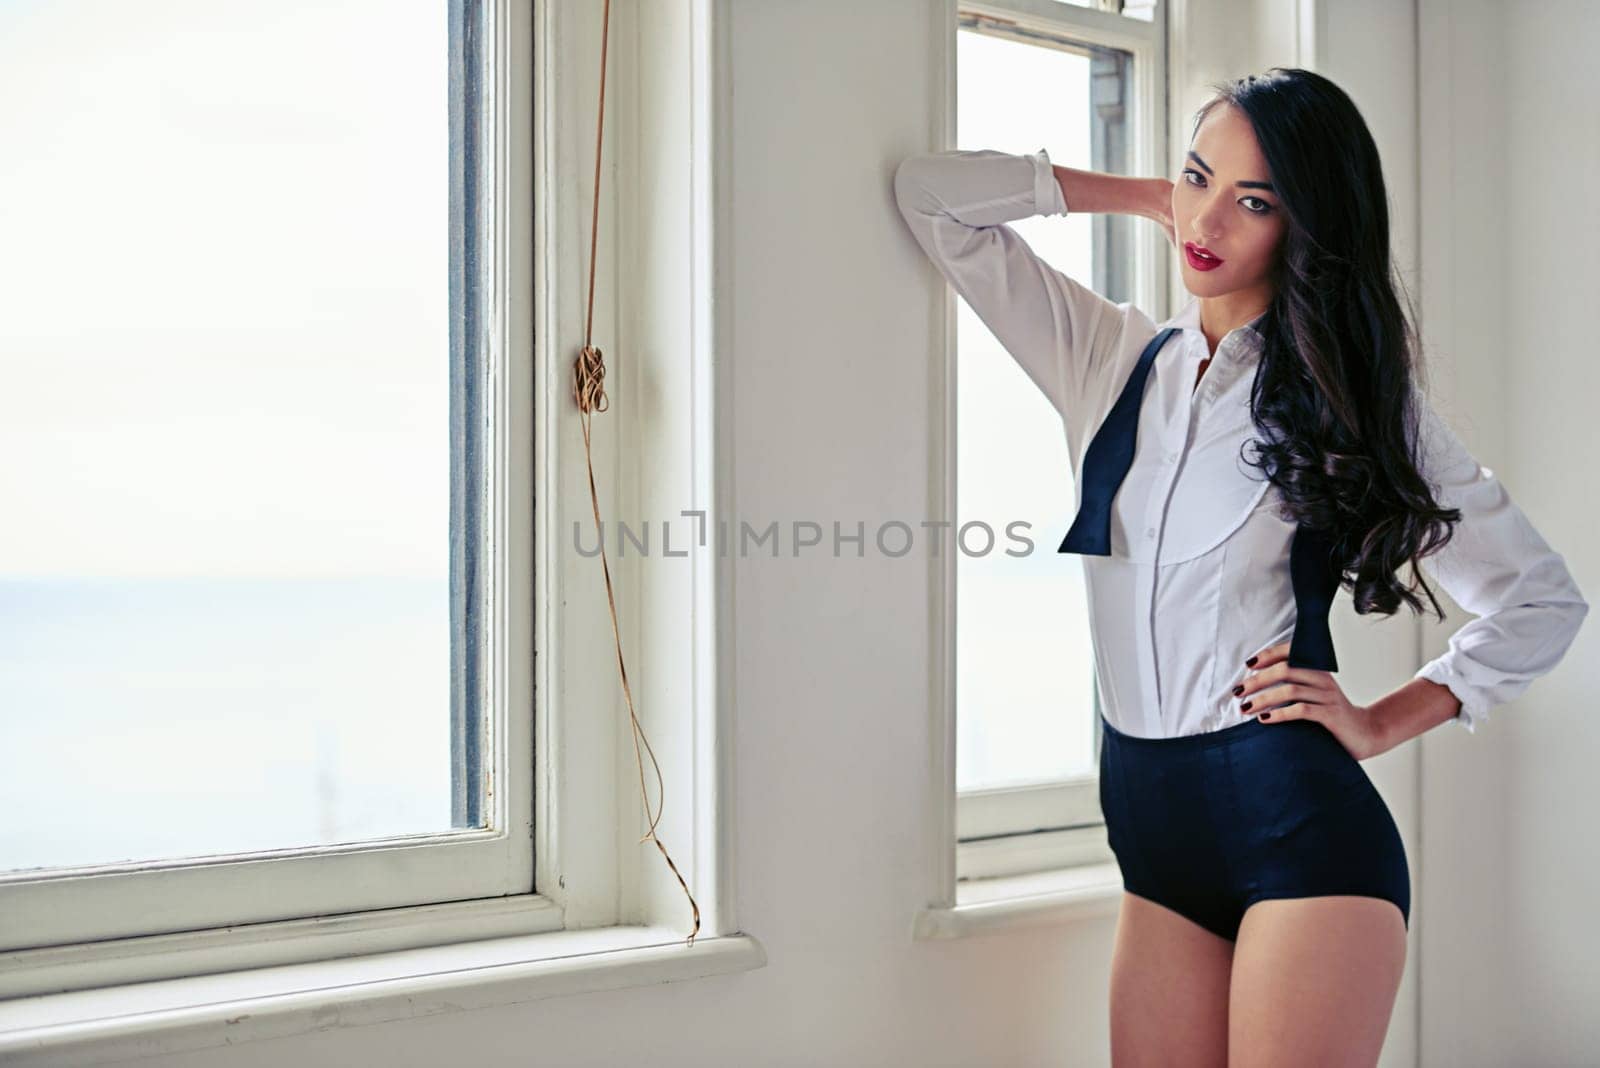 Undressing, woman and dancer portrait with classic, dress shirt and formal fashion in a dance studio. Confidence, home and window with elegance and classy style for performance and tap practice.